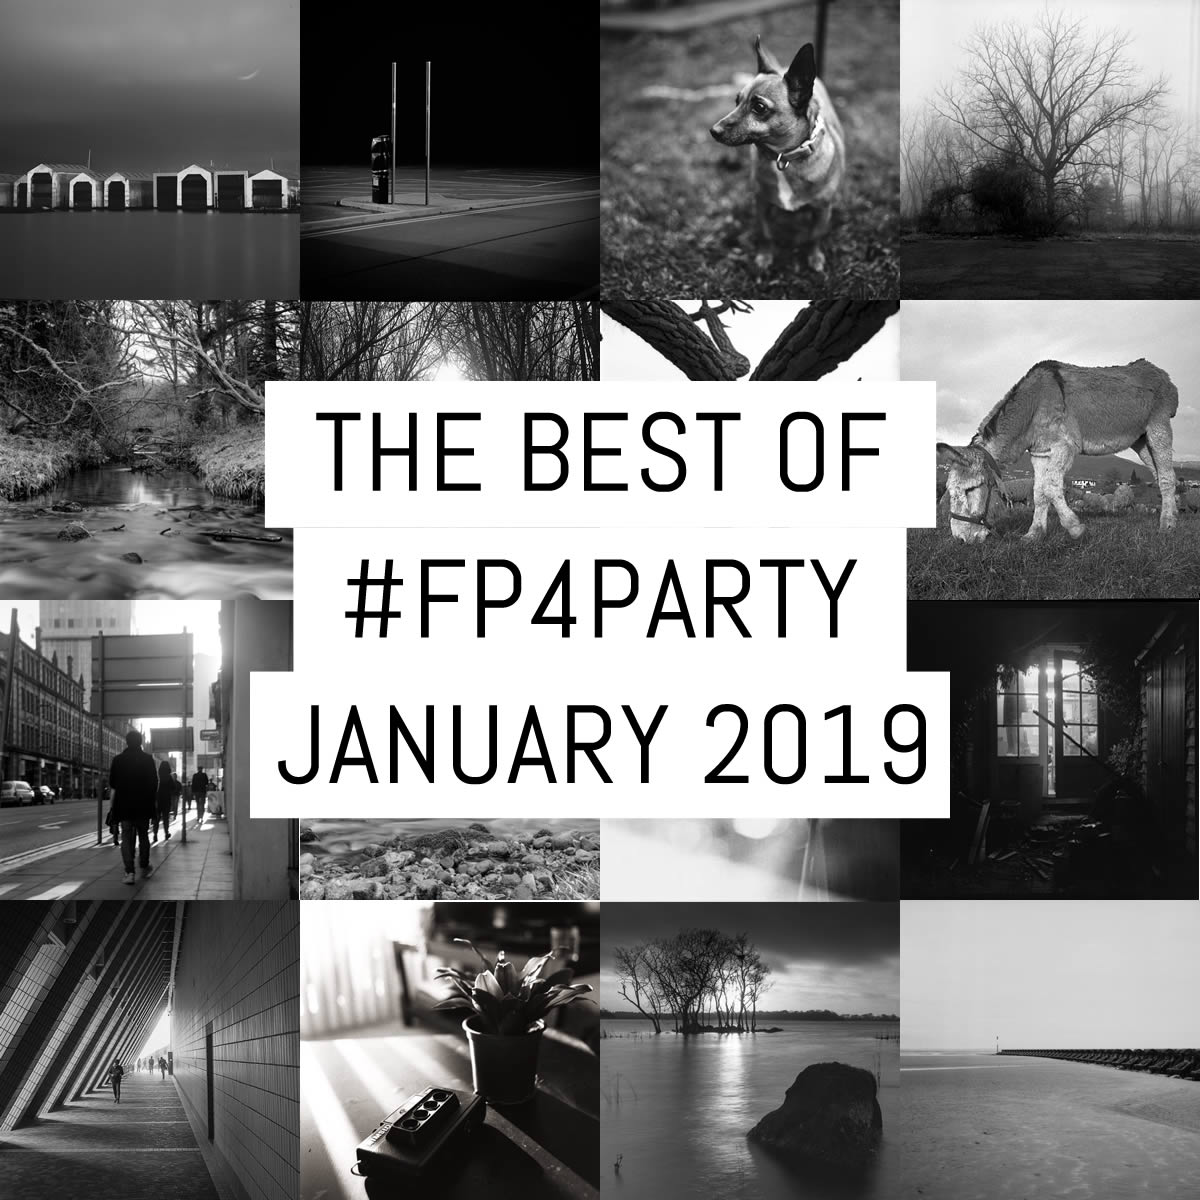 The best of #FP4party January 2019